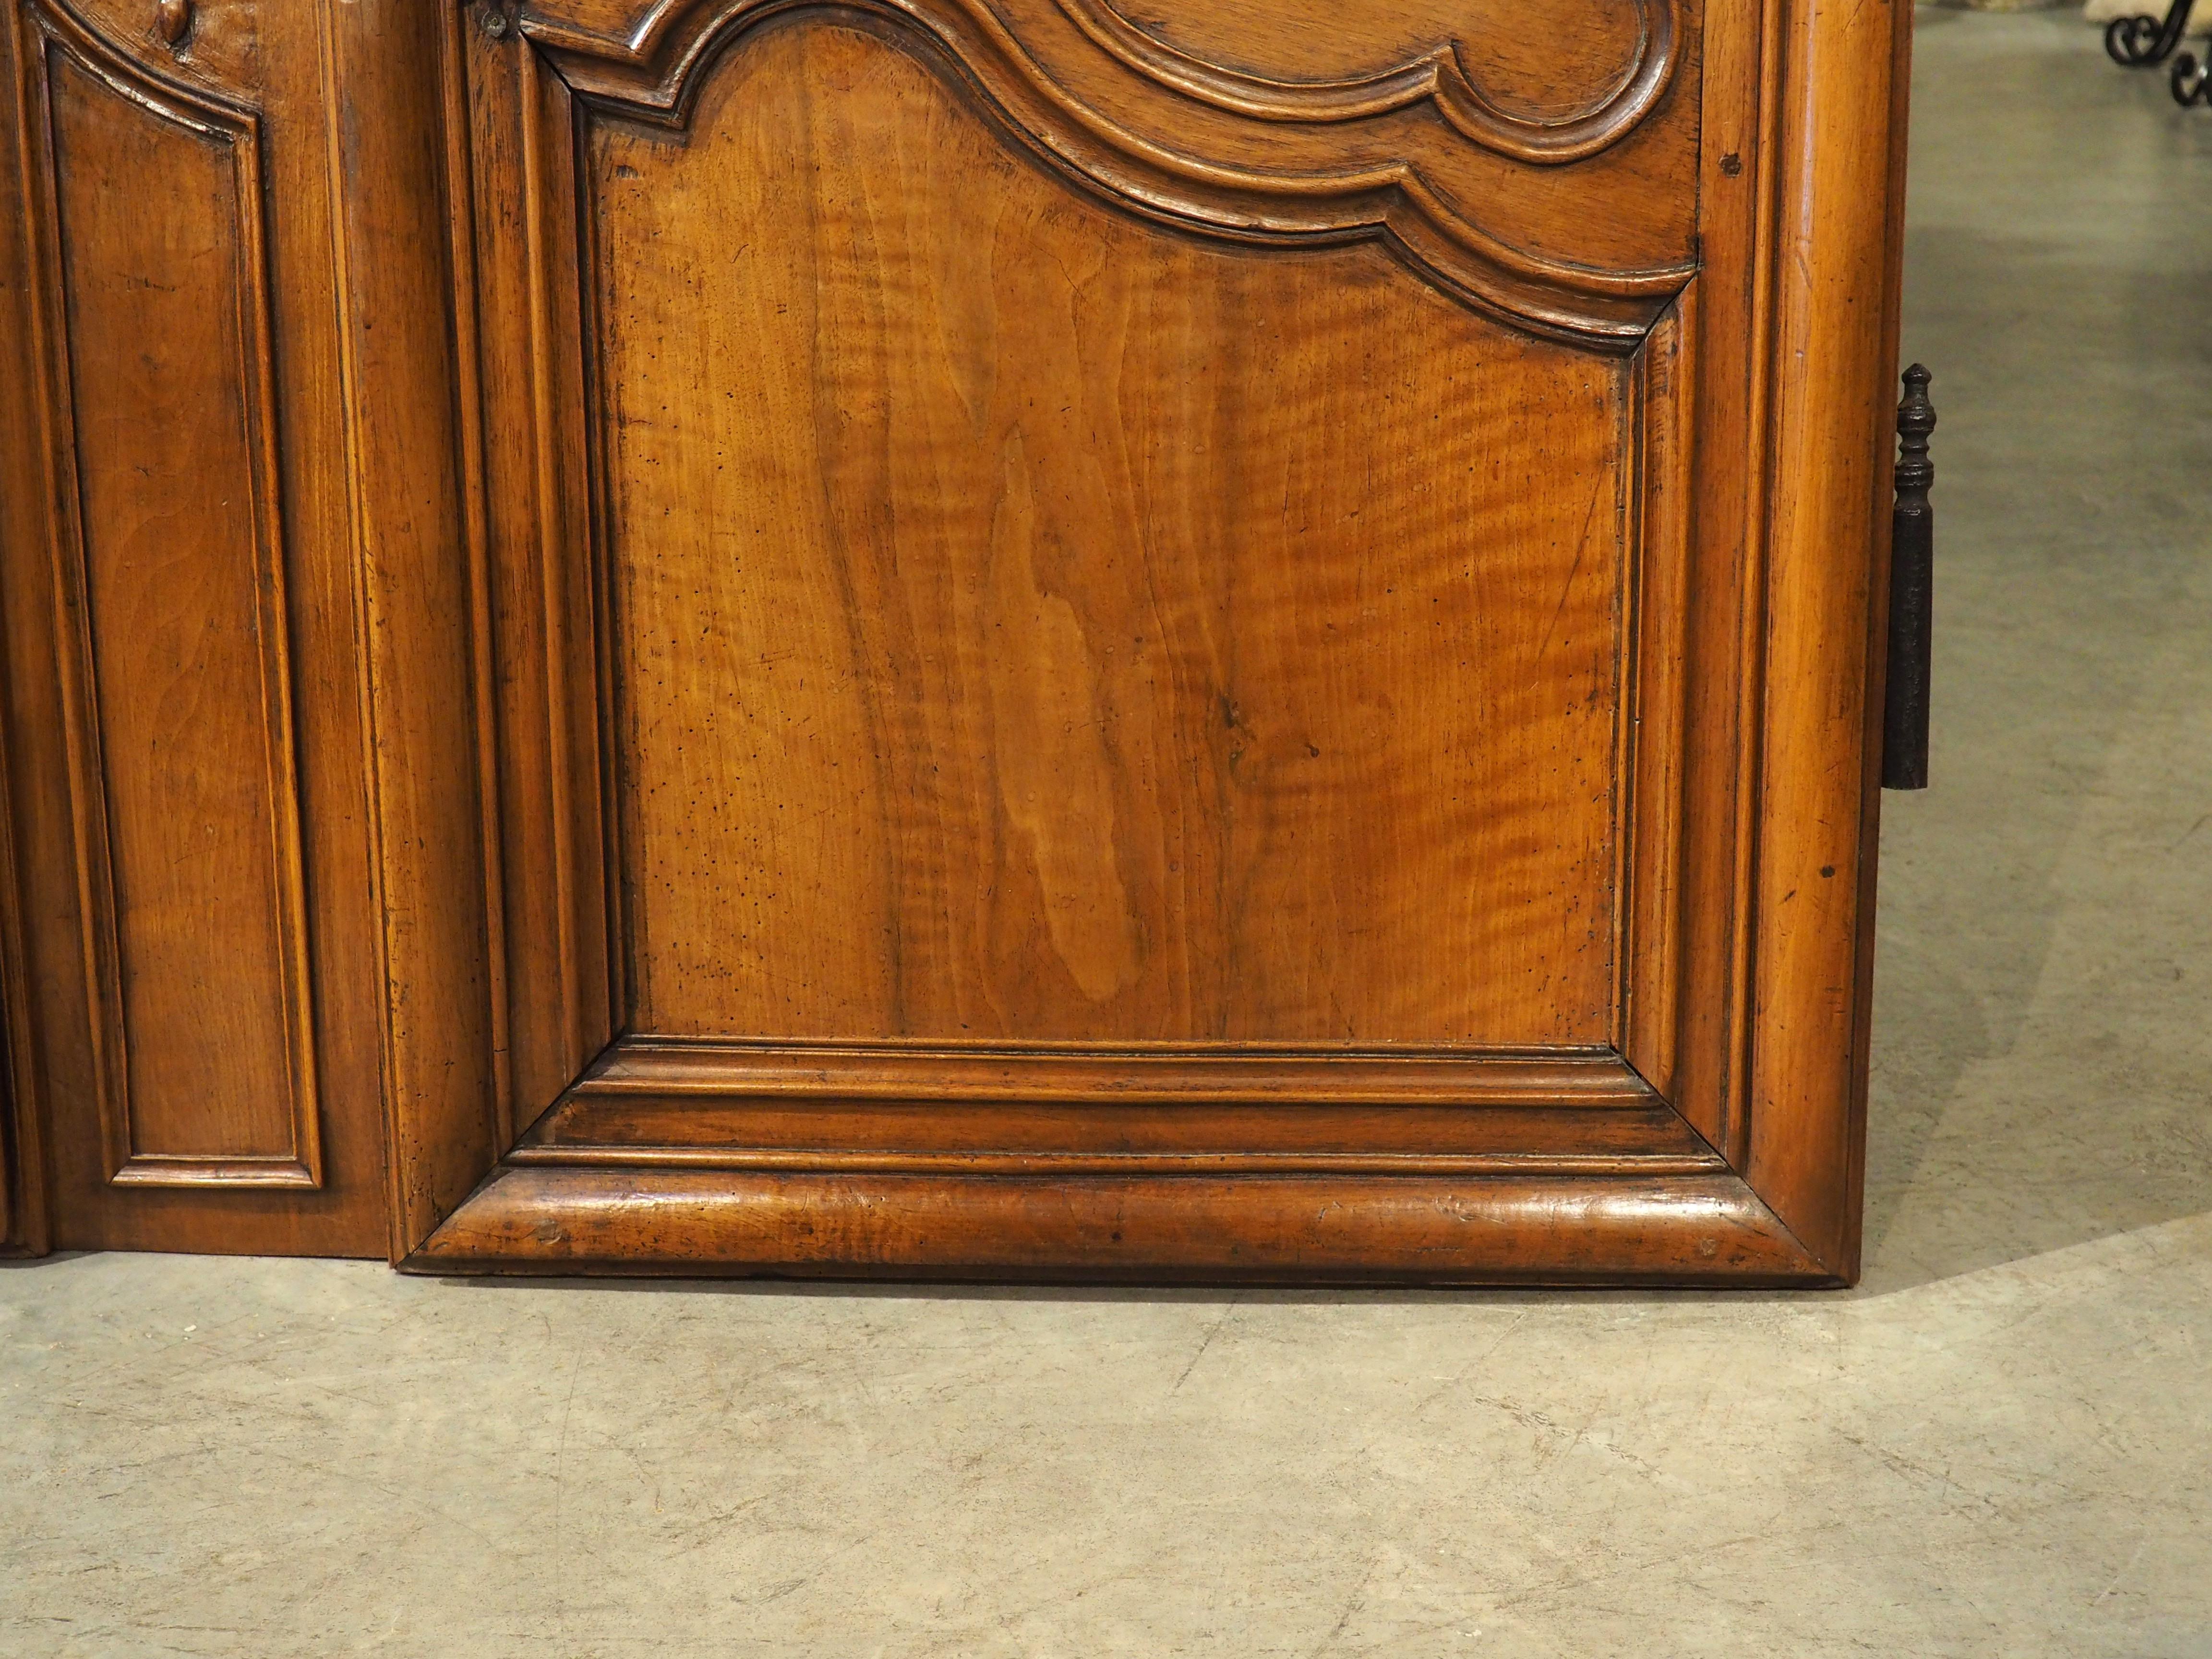 Hand-Carved Pair of Circa 1750 Solid Walnut Façade or Cabinet Doors from Provence, France For Sale